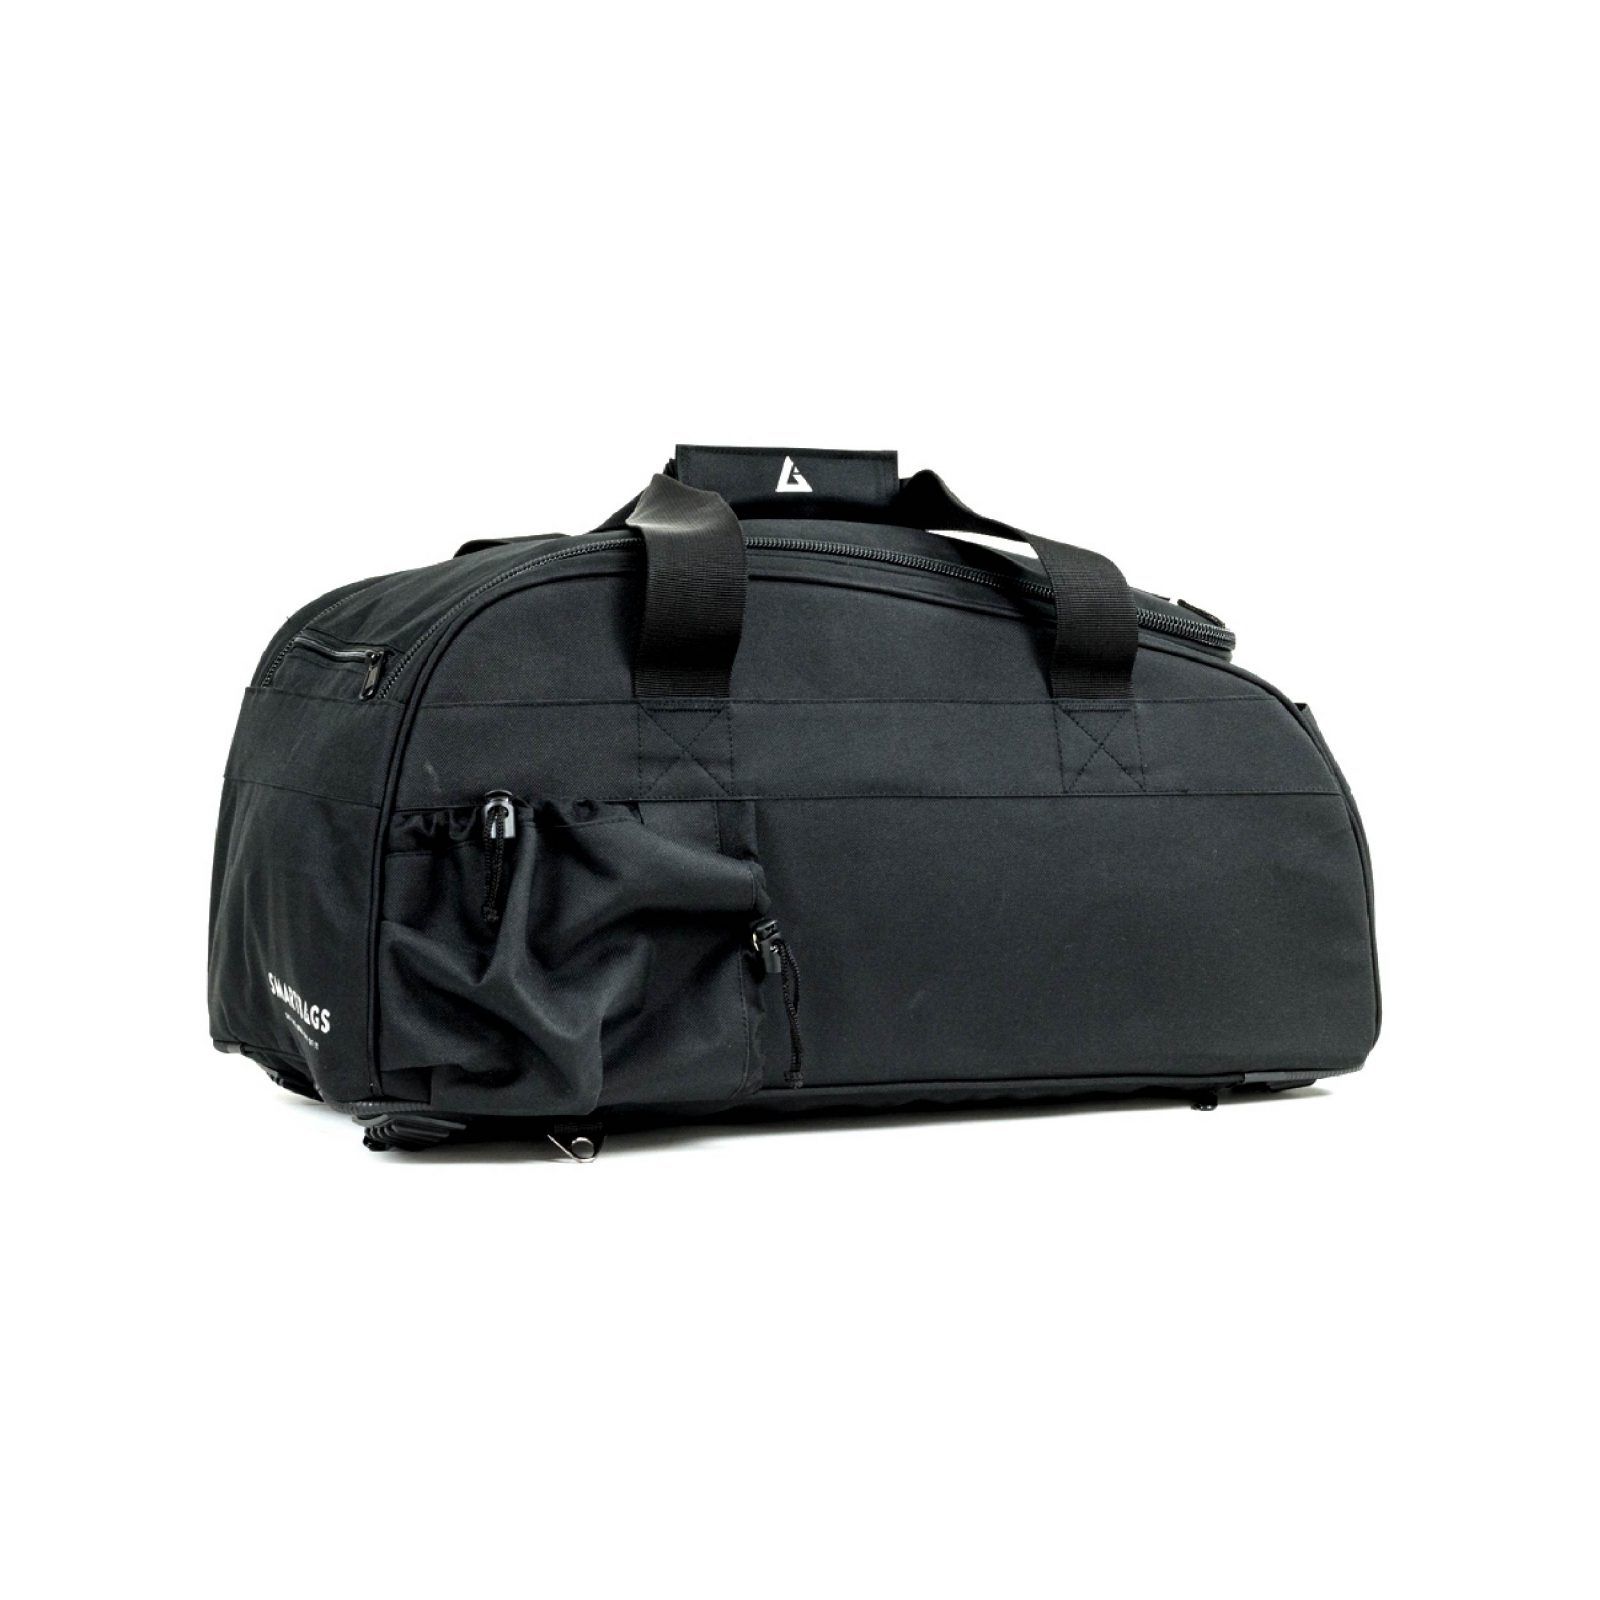 Smartbags ice right square 1600x1600